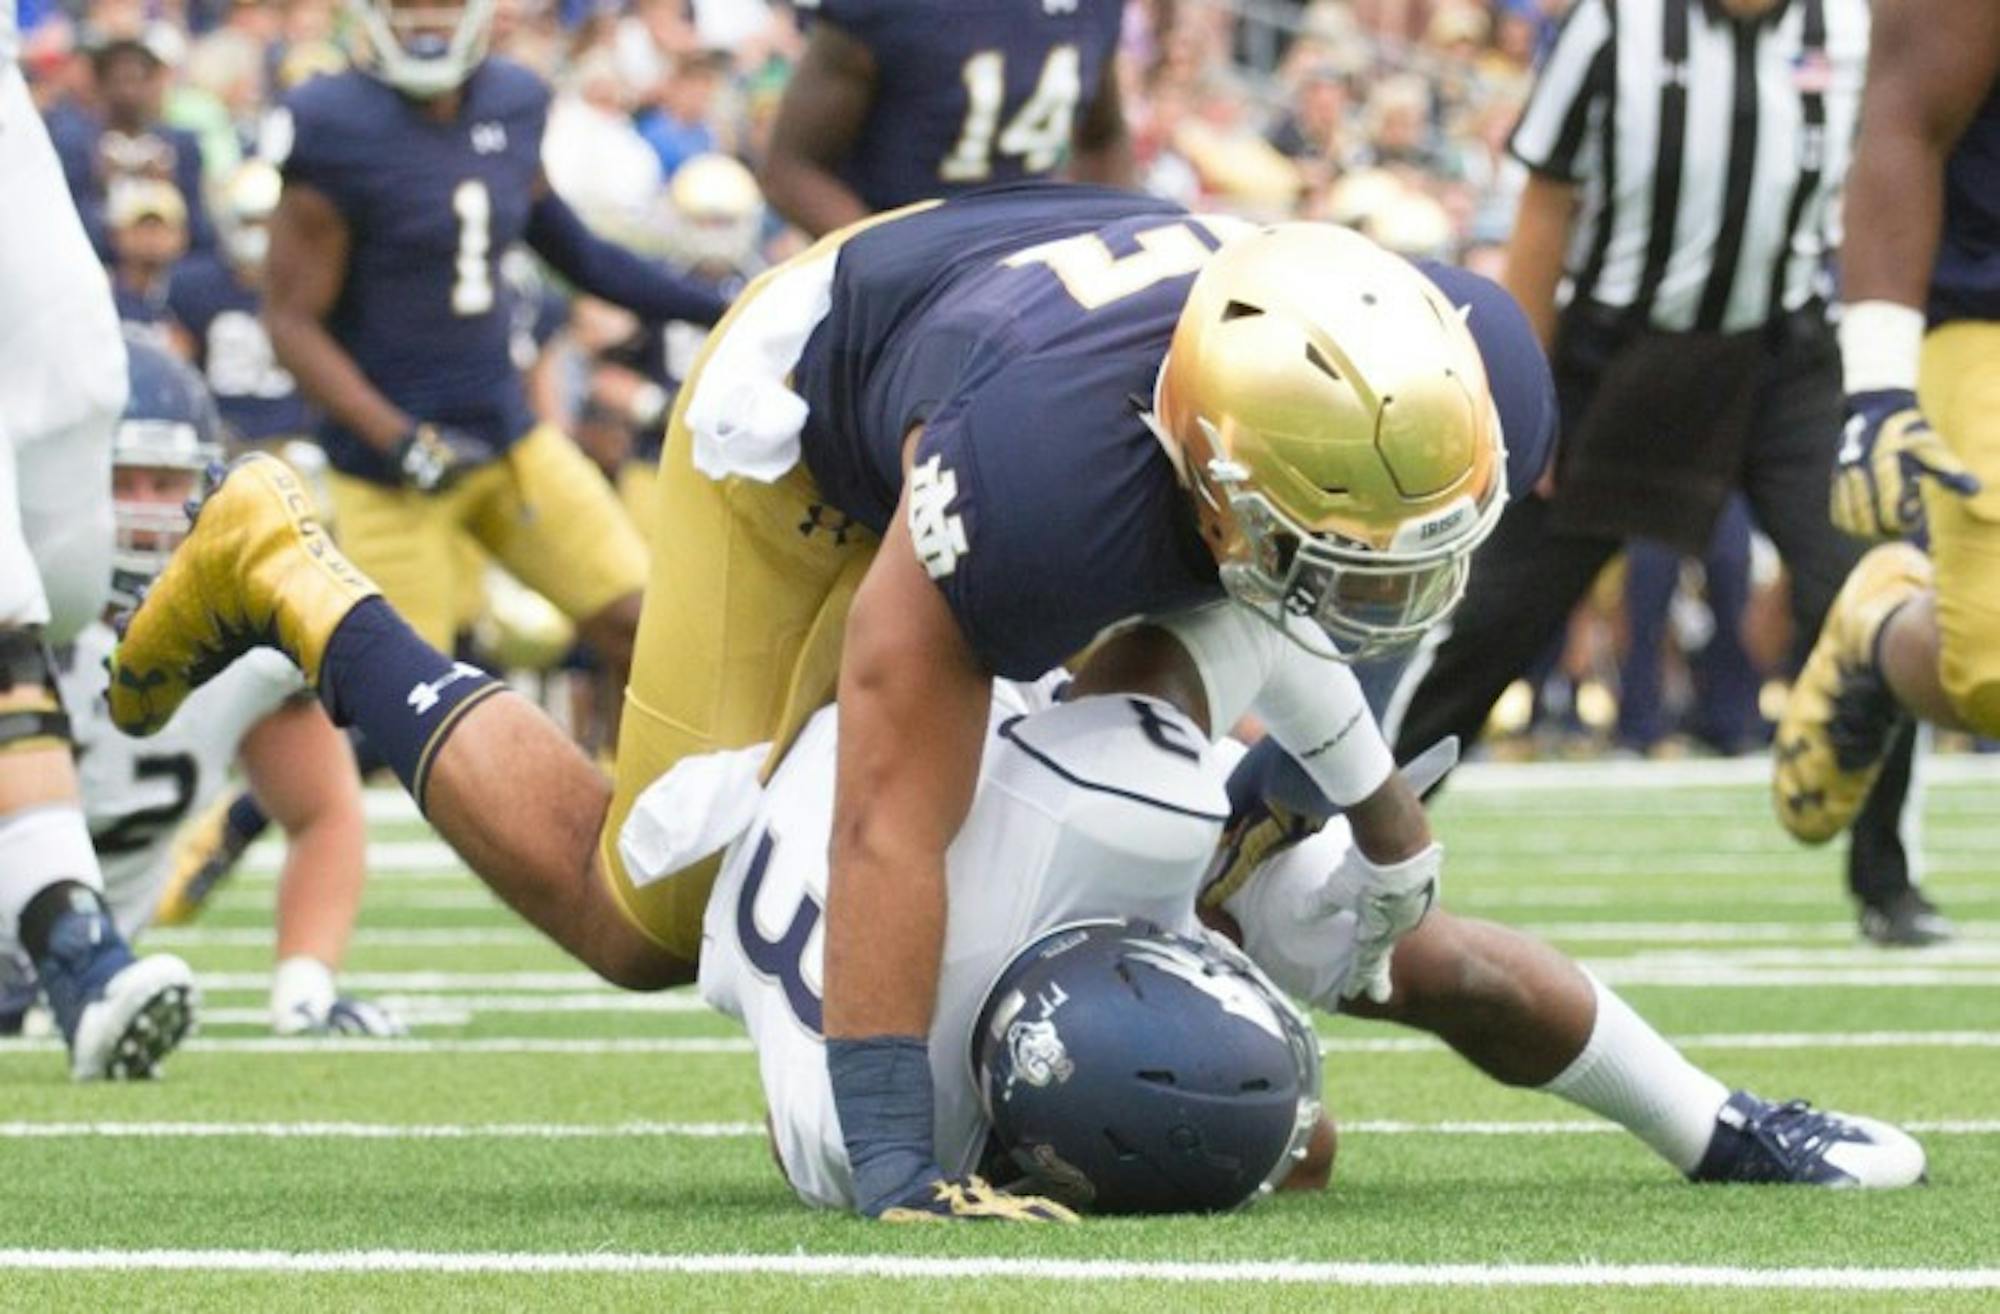 Senior linebacker and team captain James Onwualu finishes tackling Nevada sophomore receiver Ahki Mohammad in the backfield during Notre Dame’s victory over the Wolf Pack last weekend. Onwualu finished the game with five tackles, tied for most on the team.